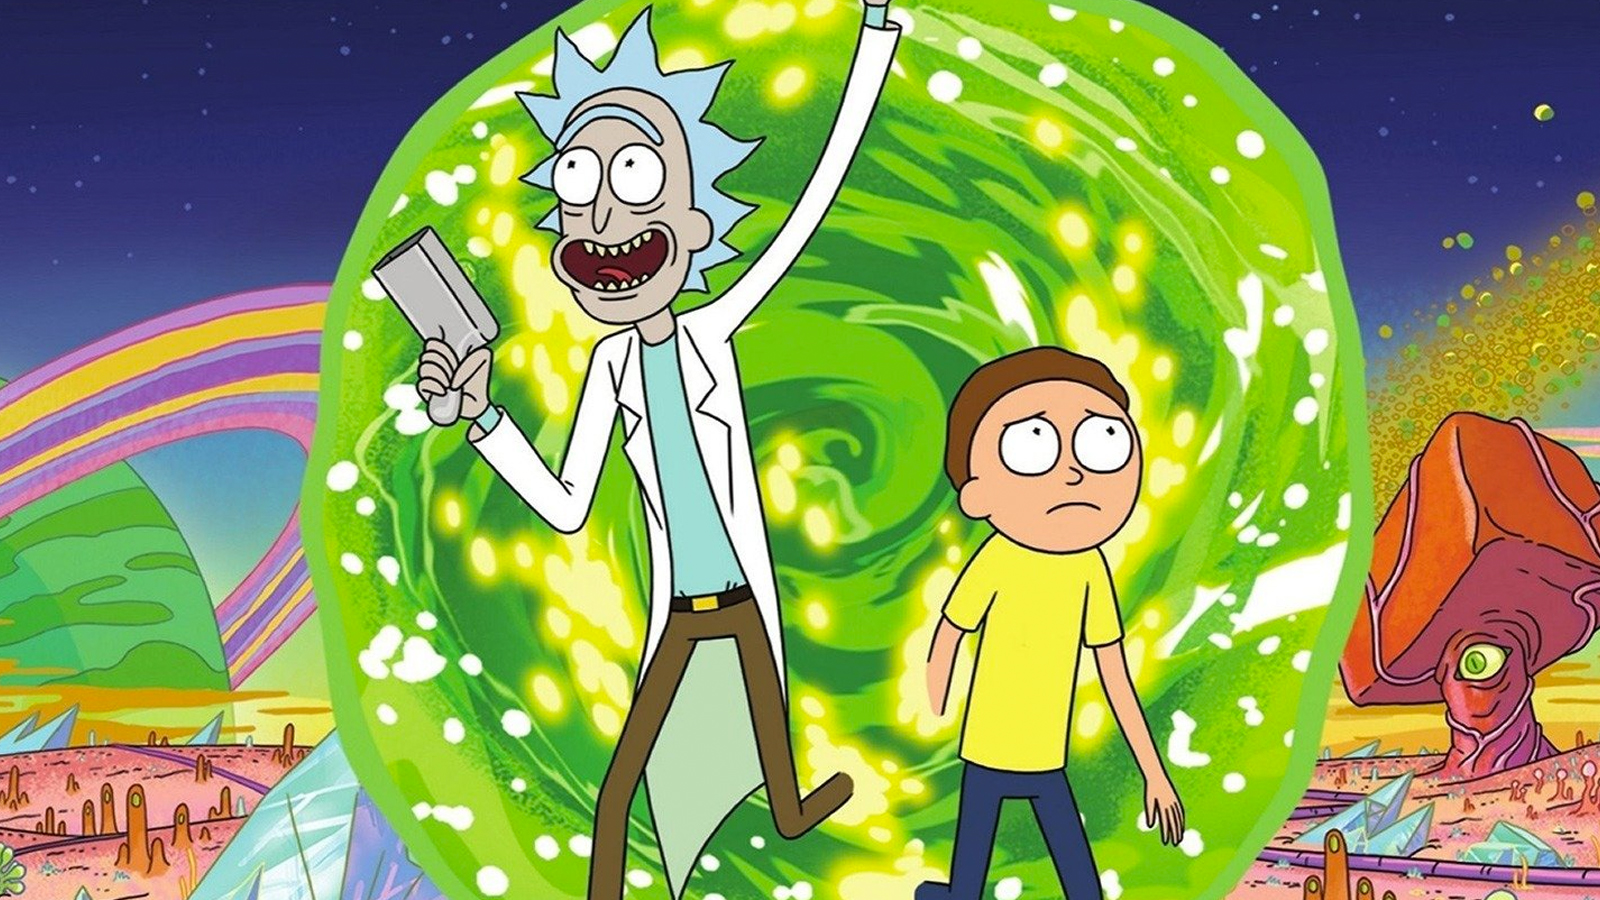 5 Shows Like Rick and Morty To Watch Before Season 6 Drops